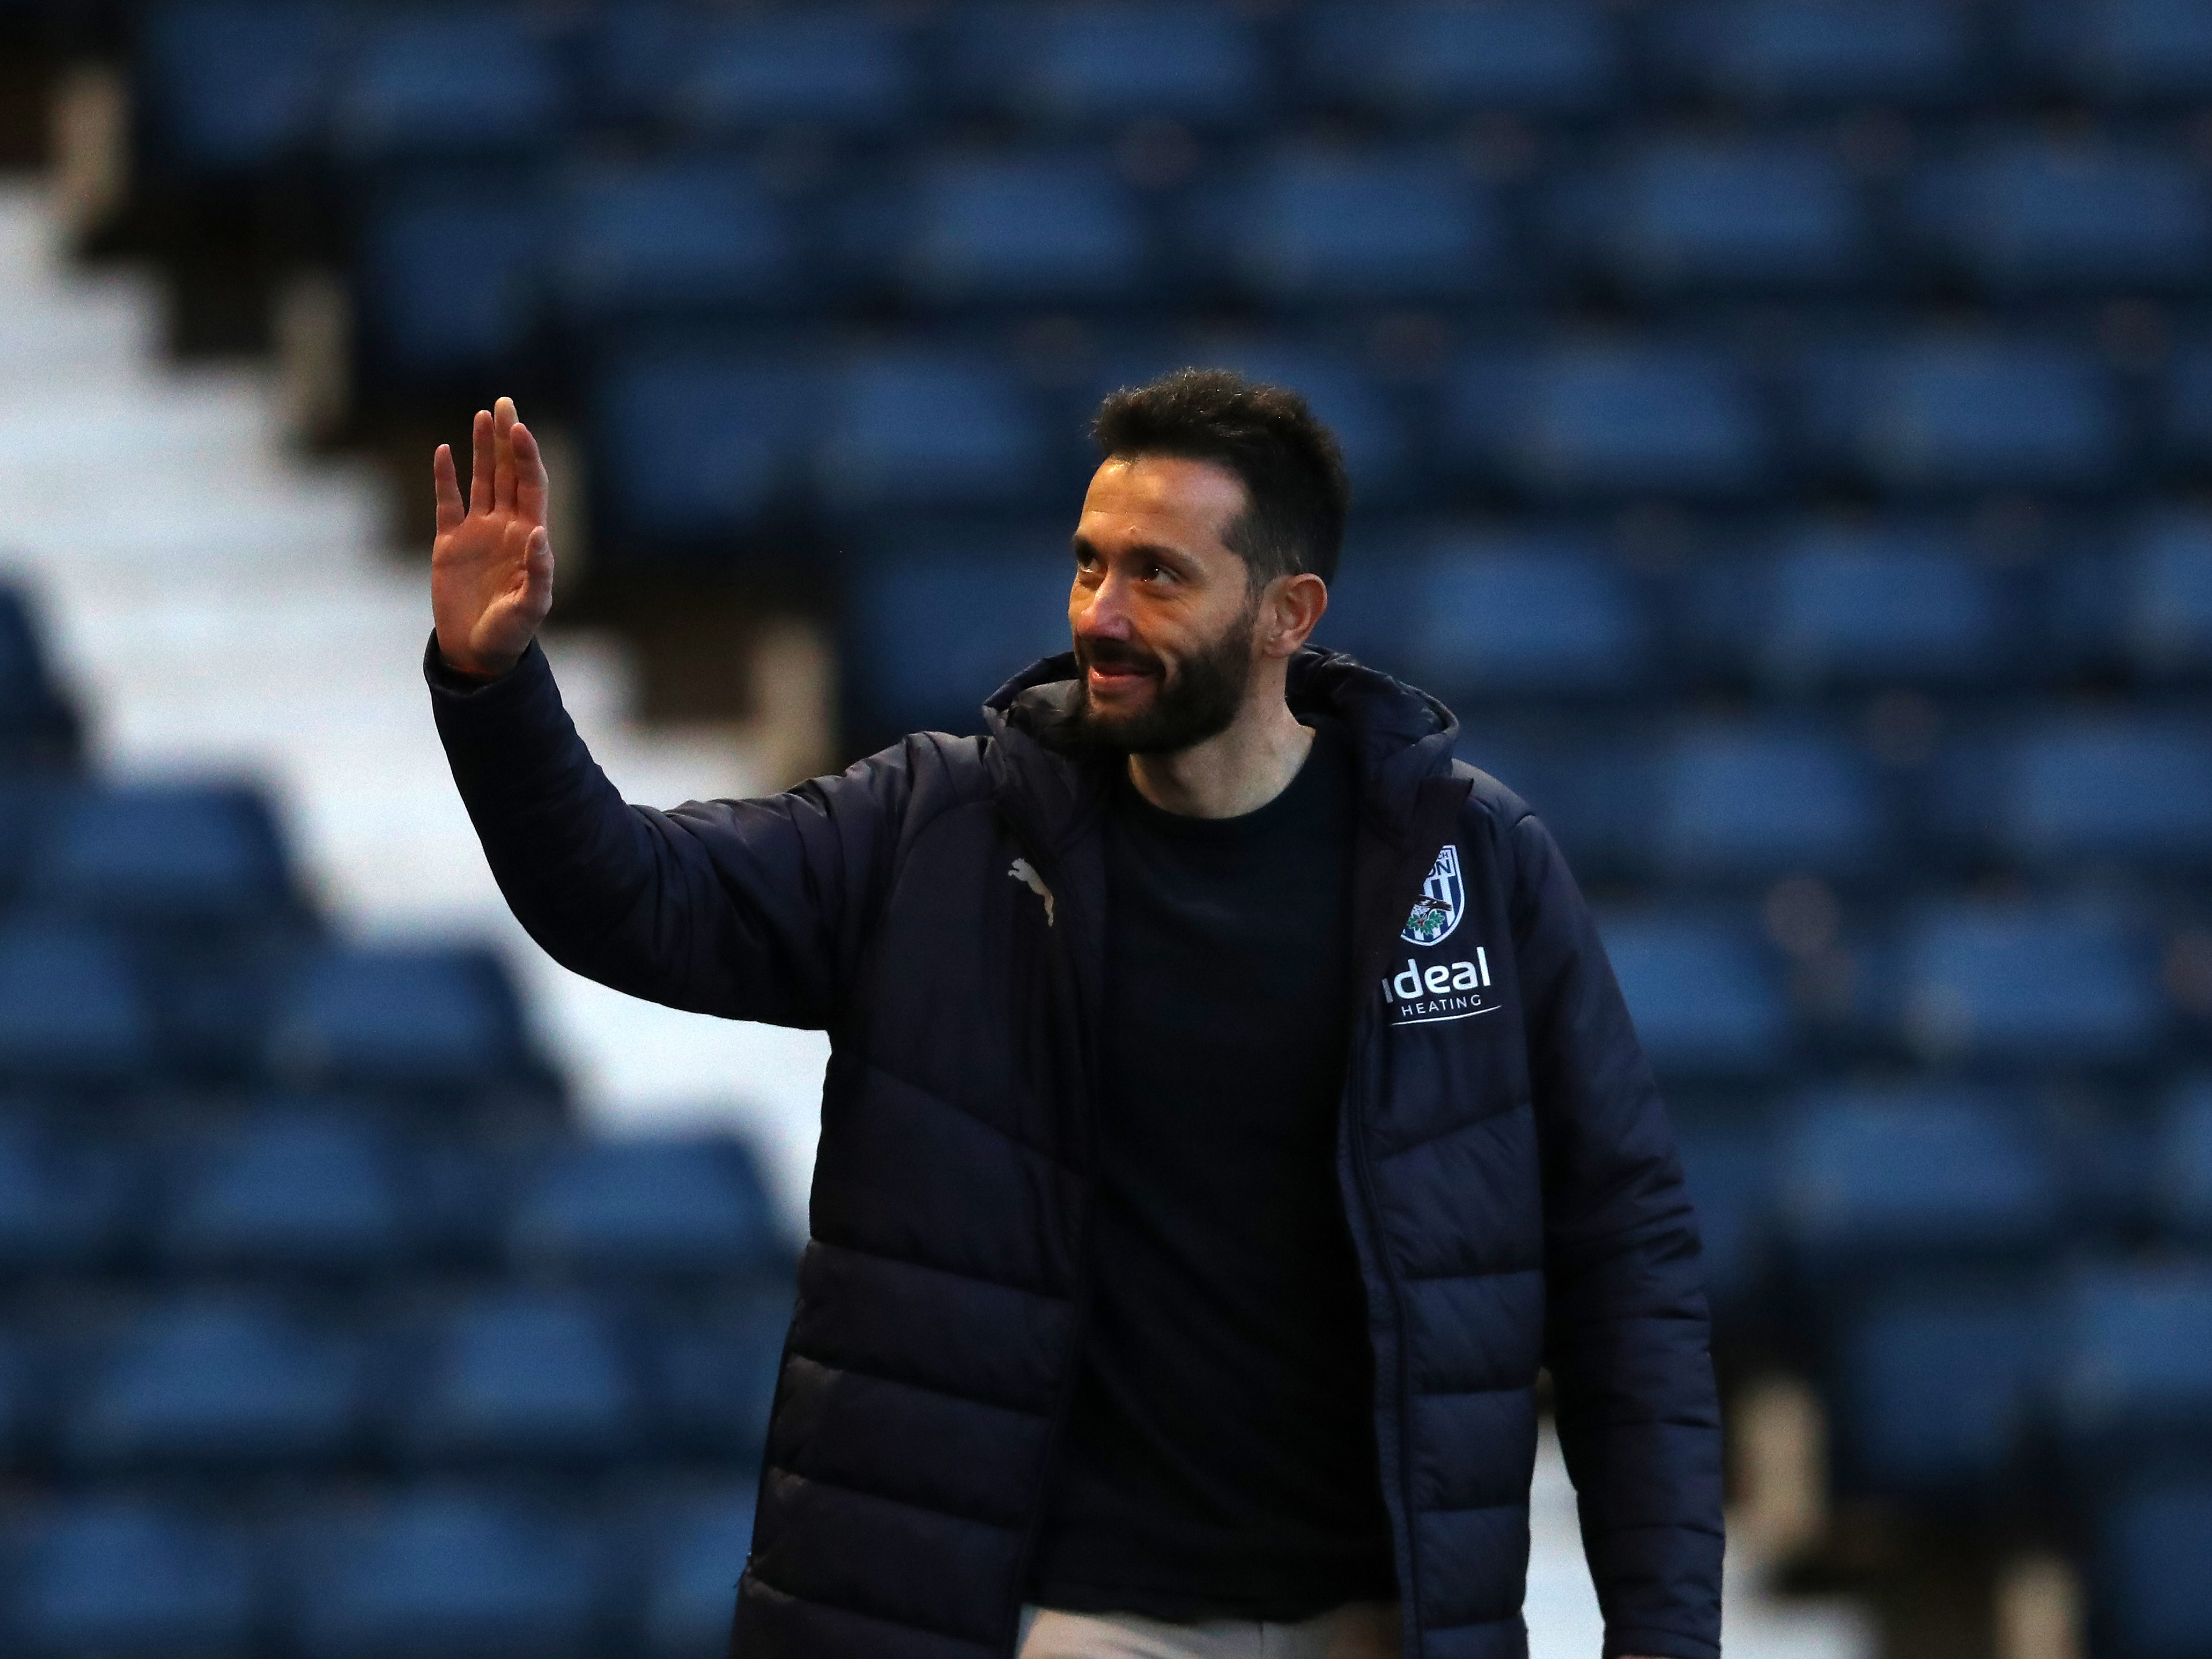 Carlos Corberán waving to supporters upon arrival at The Hawthorns